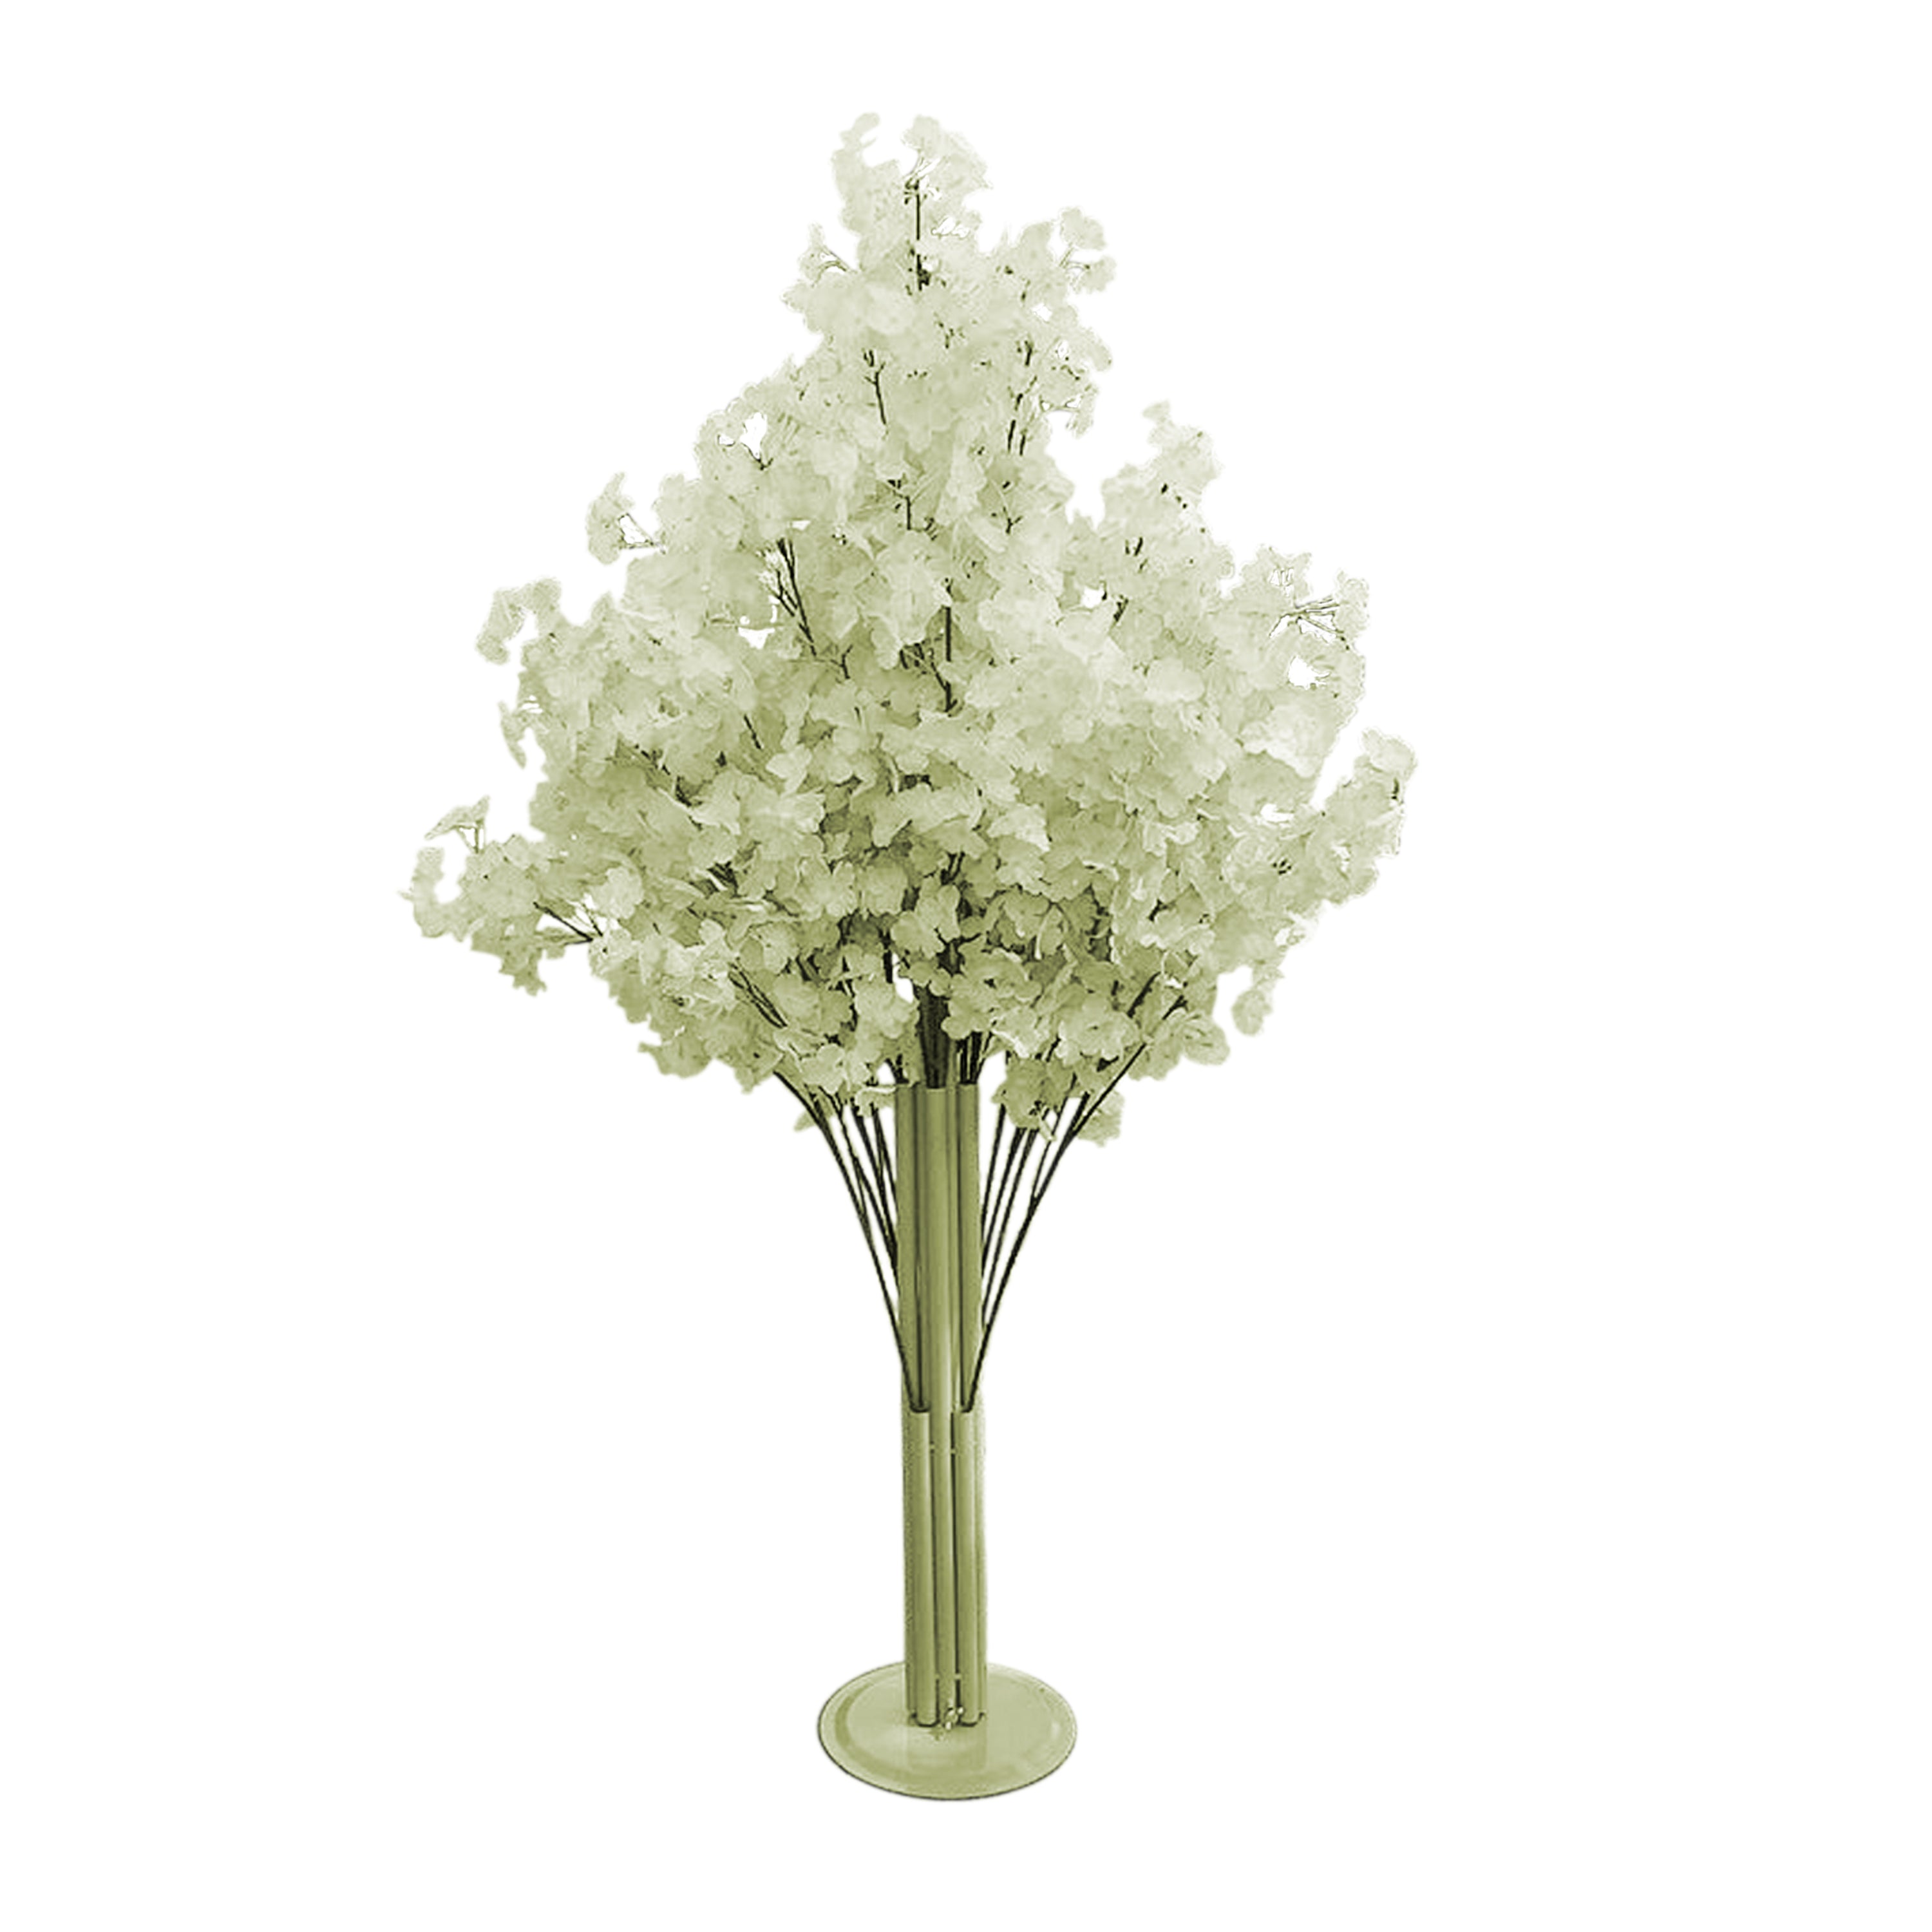 Cherry Blossom Tree Stand Colour - Purpel, Rani, White, Pink, Red.